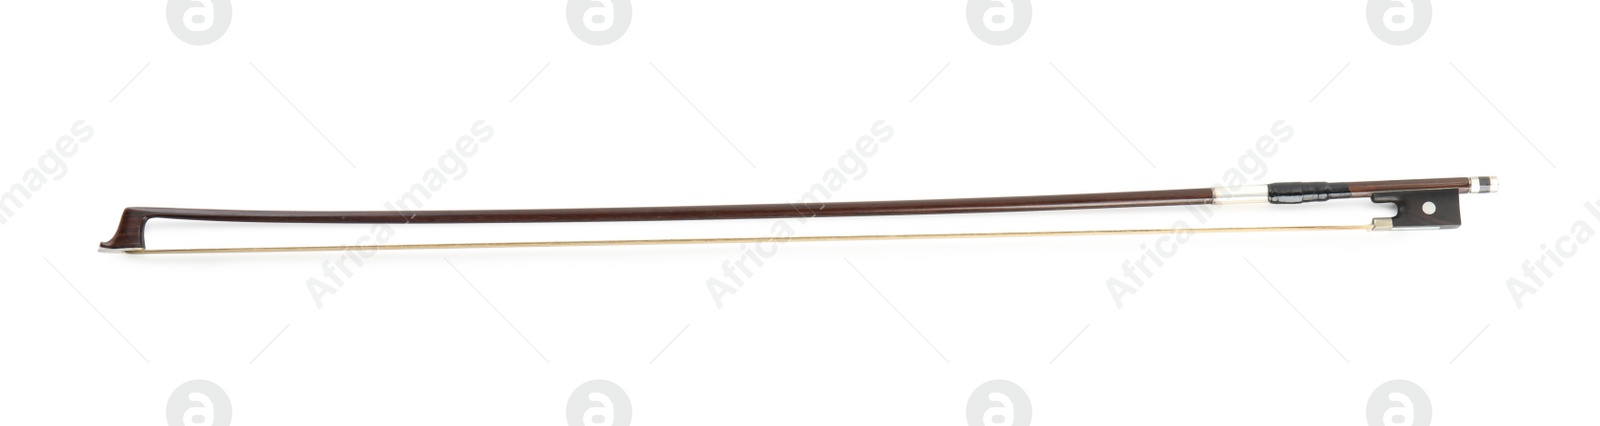 Photo of Classic violin bow isolated on white, top view. Musical instrument